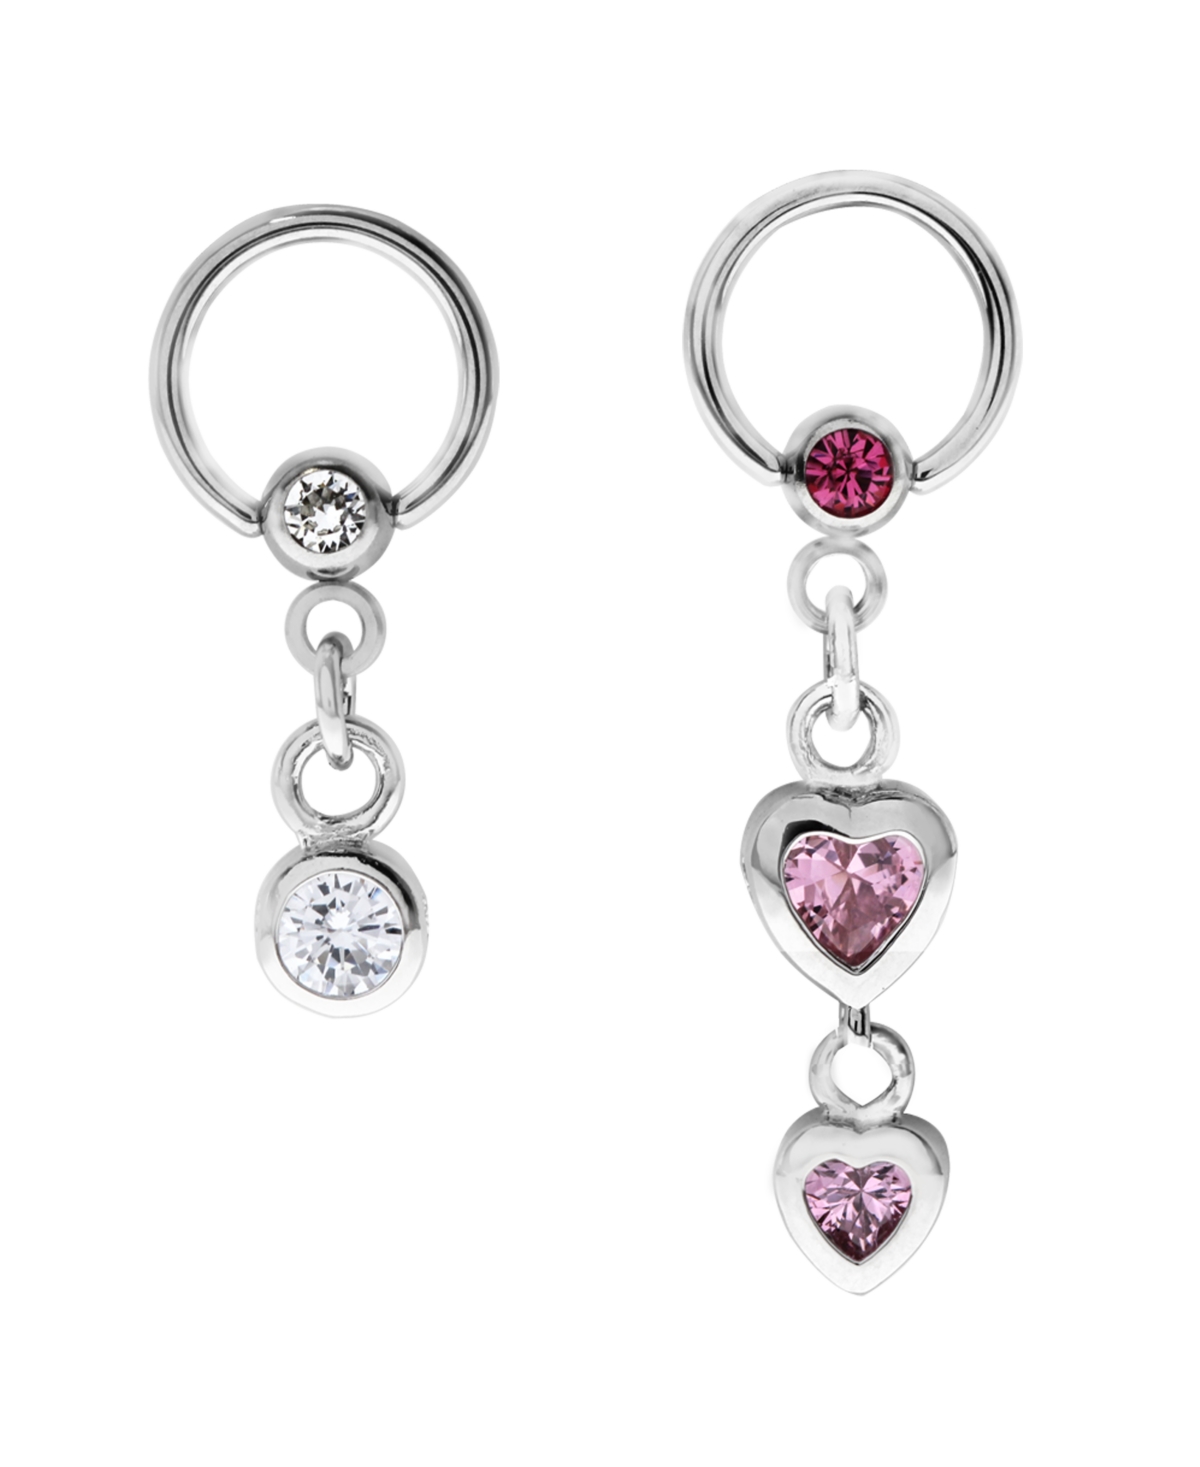 Bodifine Stainless Steel Set of 2 Crystal Drop Charm Cartilage Rings - Asstd